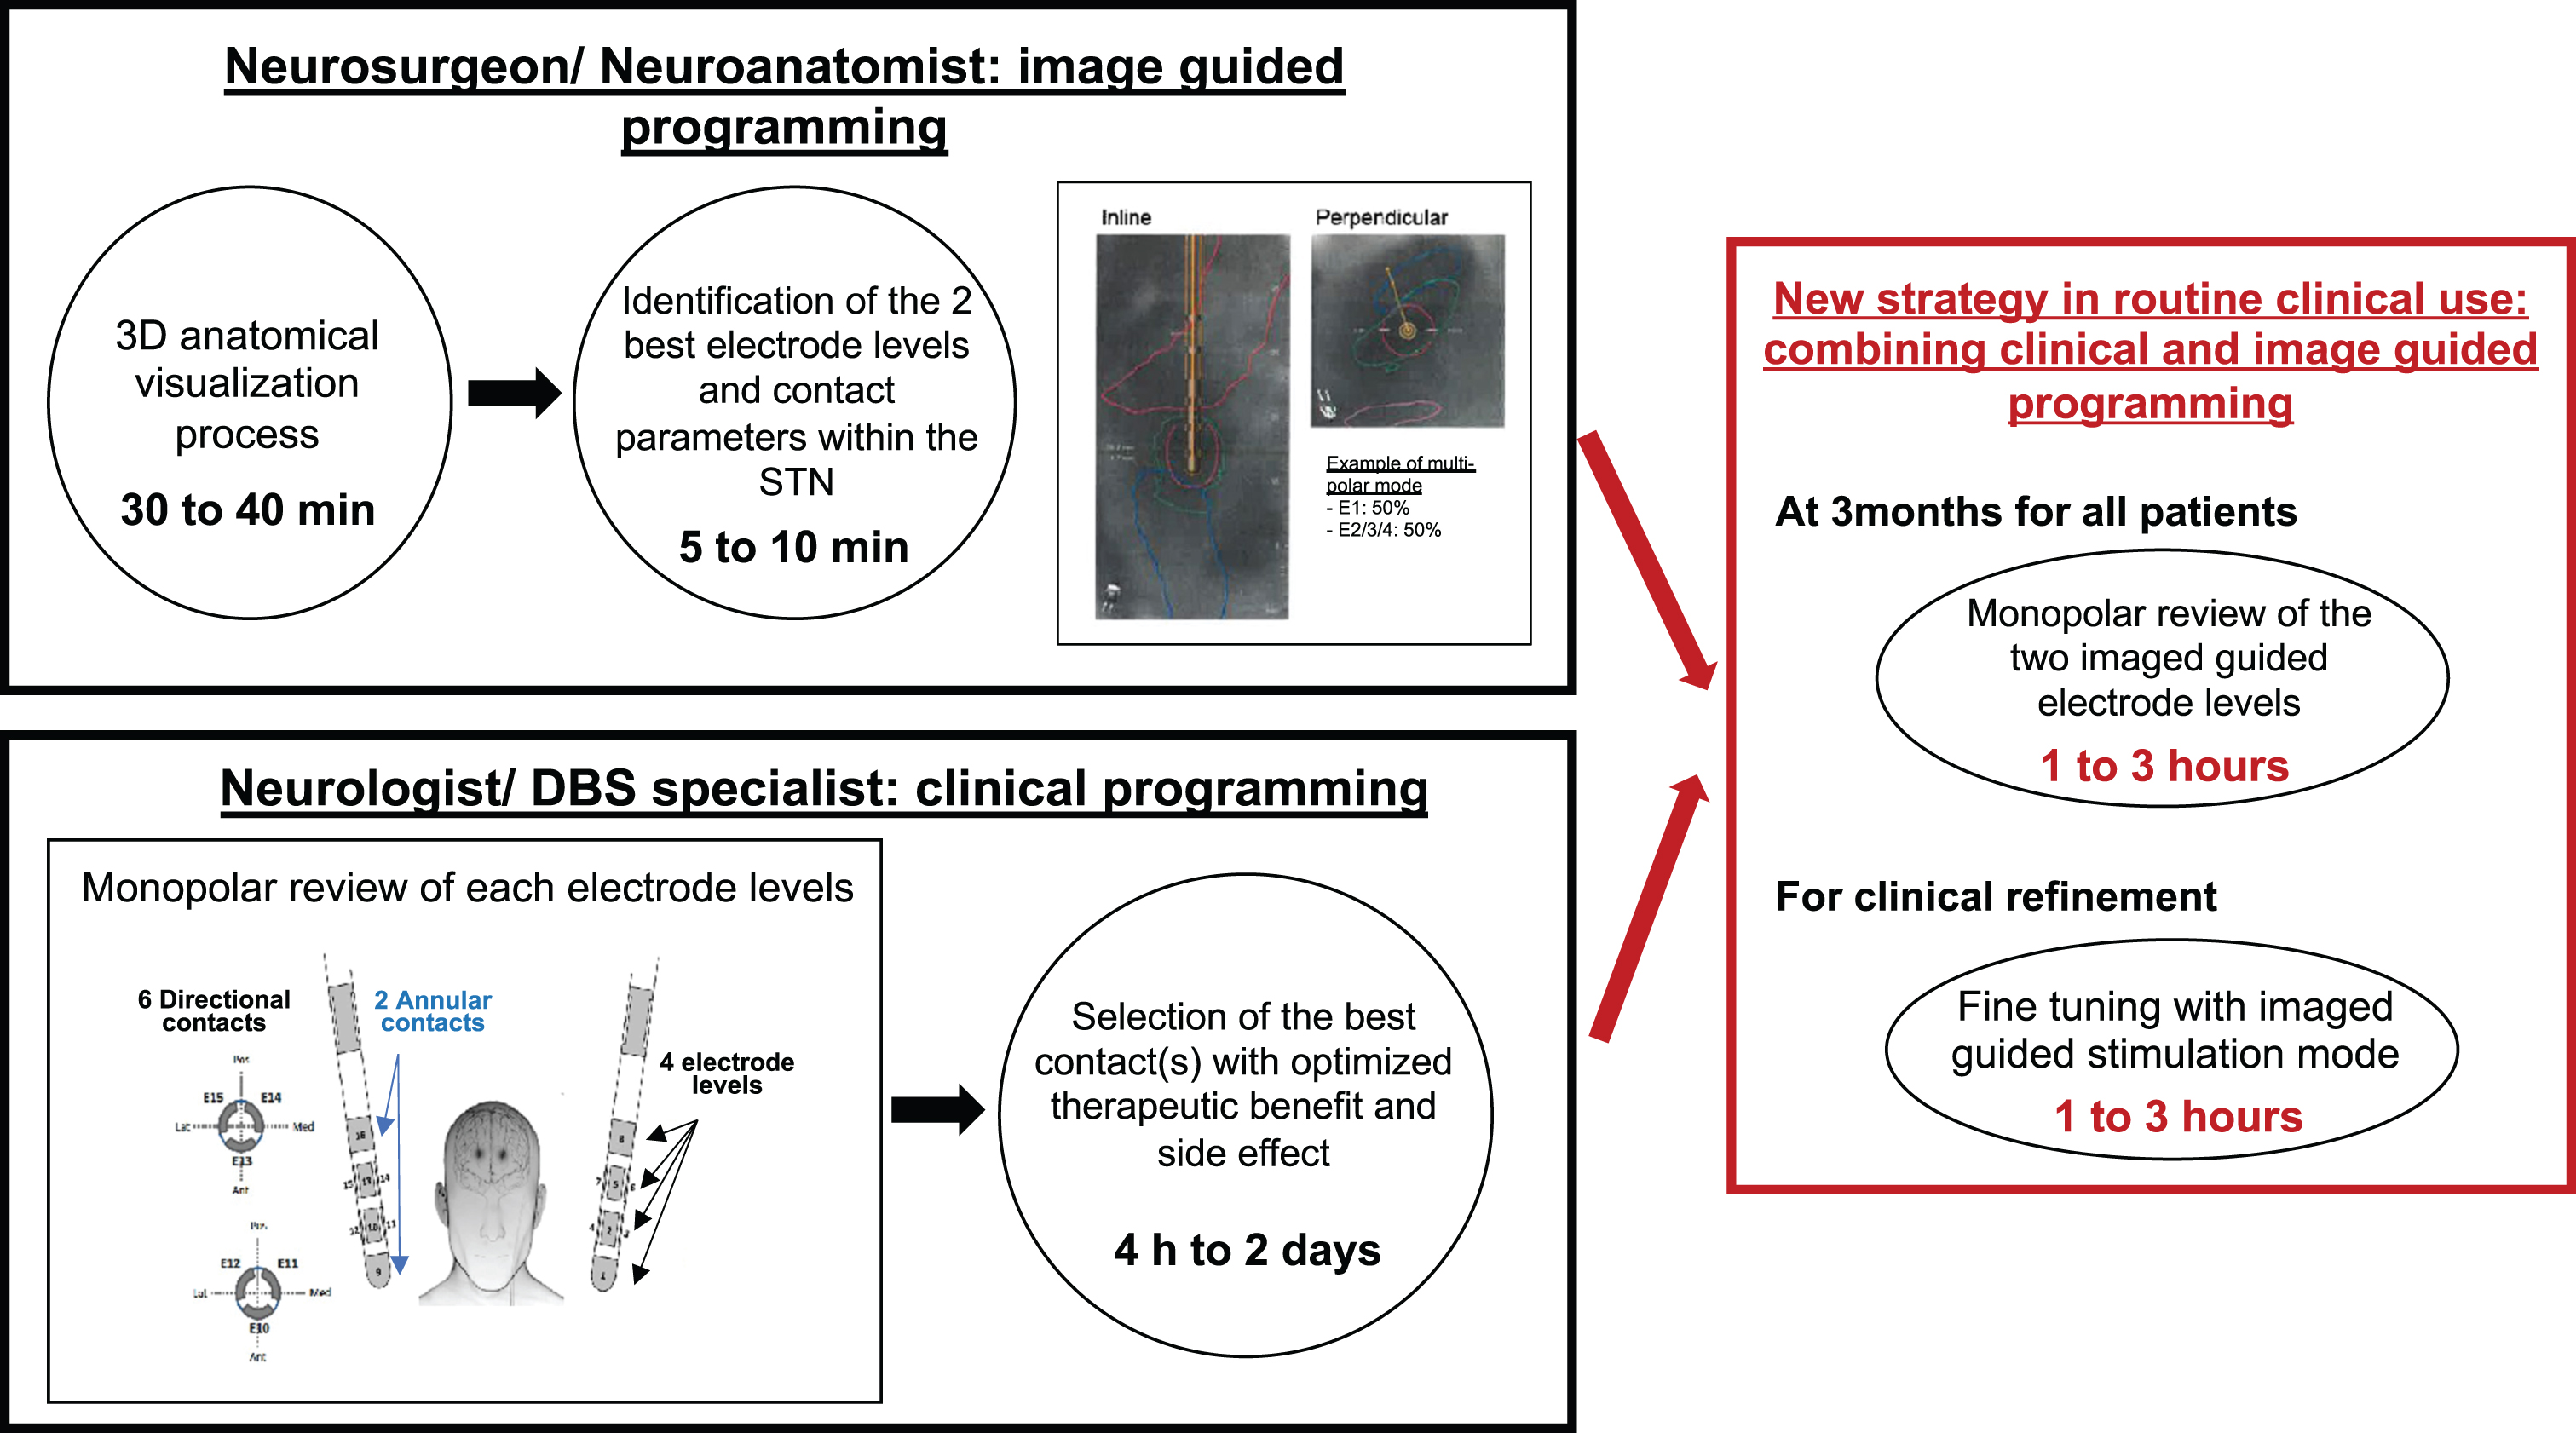 Image guided programming to save time and to assist clinical refinement. min, minutes; h, hours; STN, subthalamic nucleus.